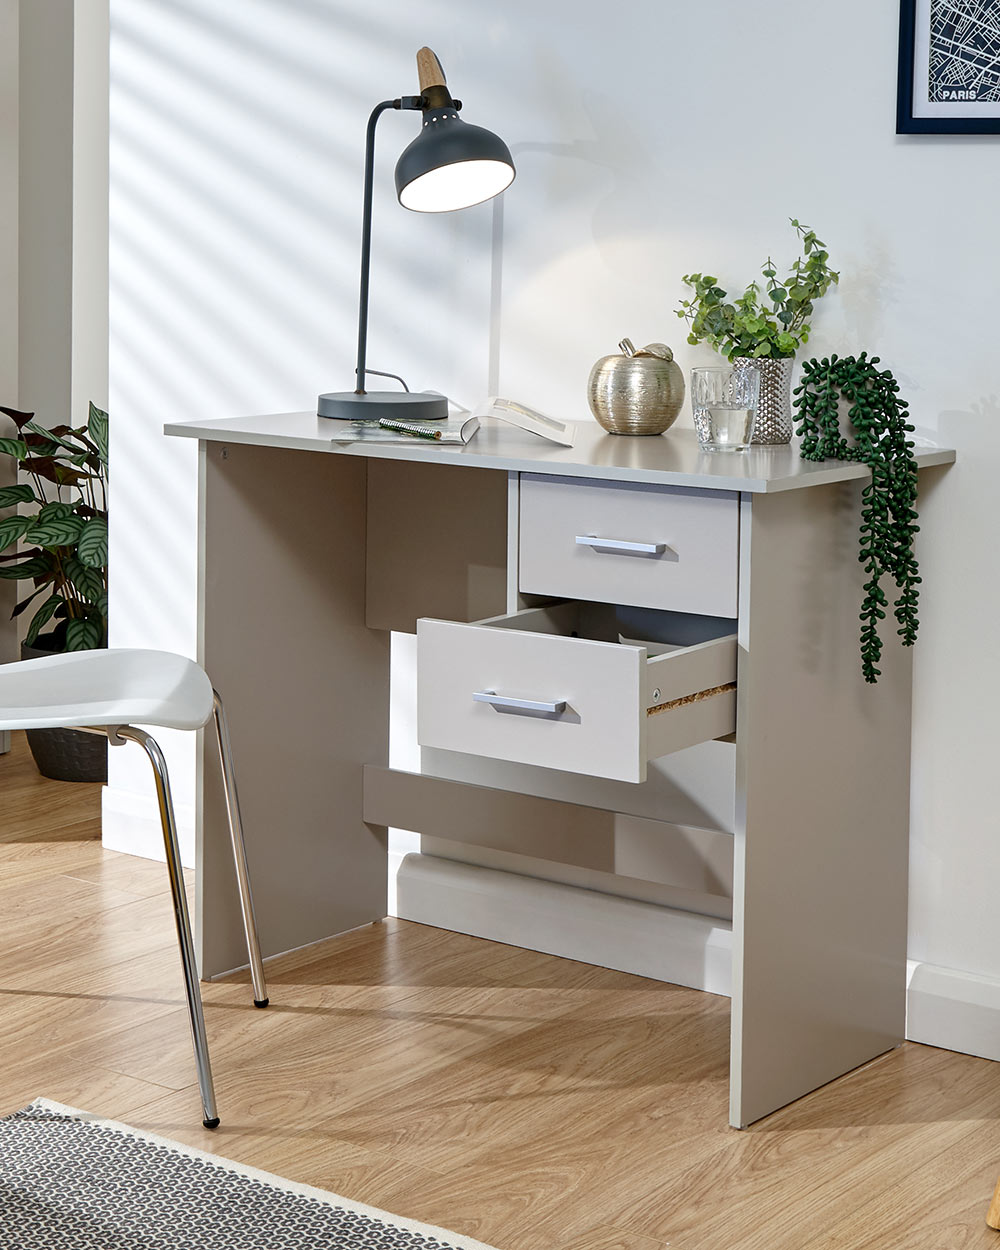 Panama desk in grey in a lifestyle photo in a room with the drawer open